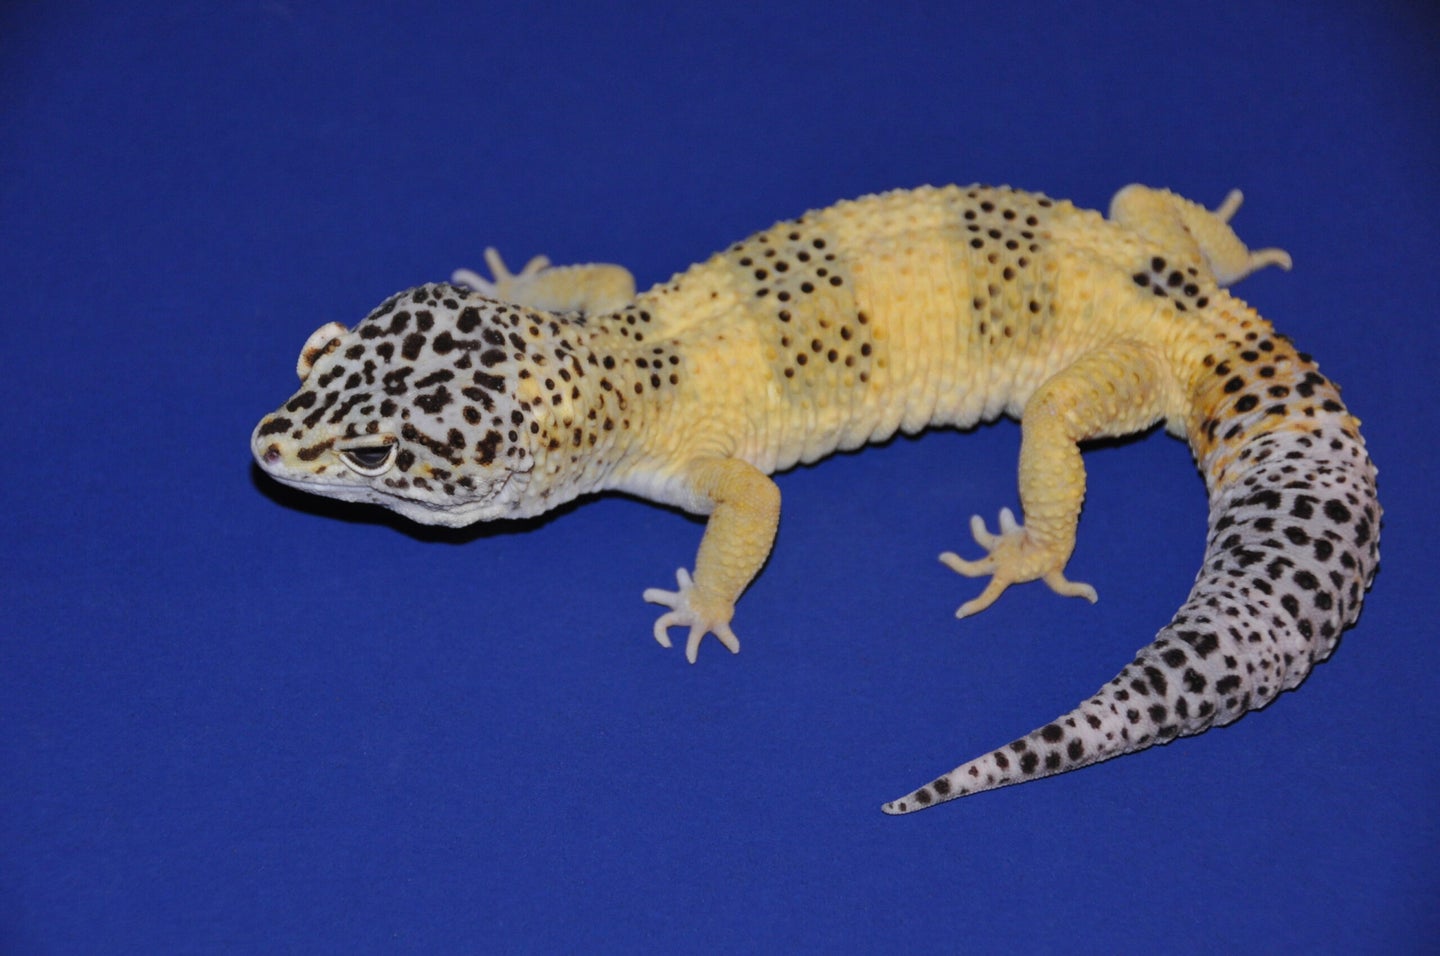 A speckled, white, beige, and lemon yellow gecko sits against a blue background.